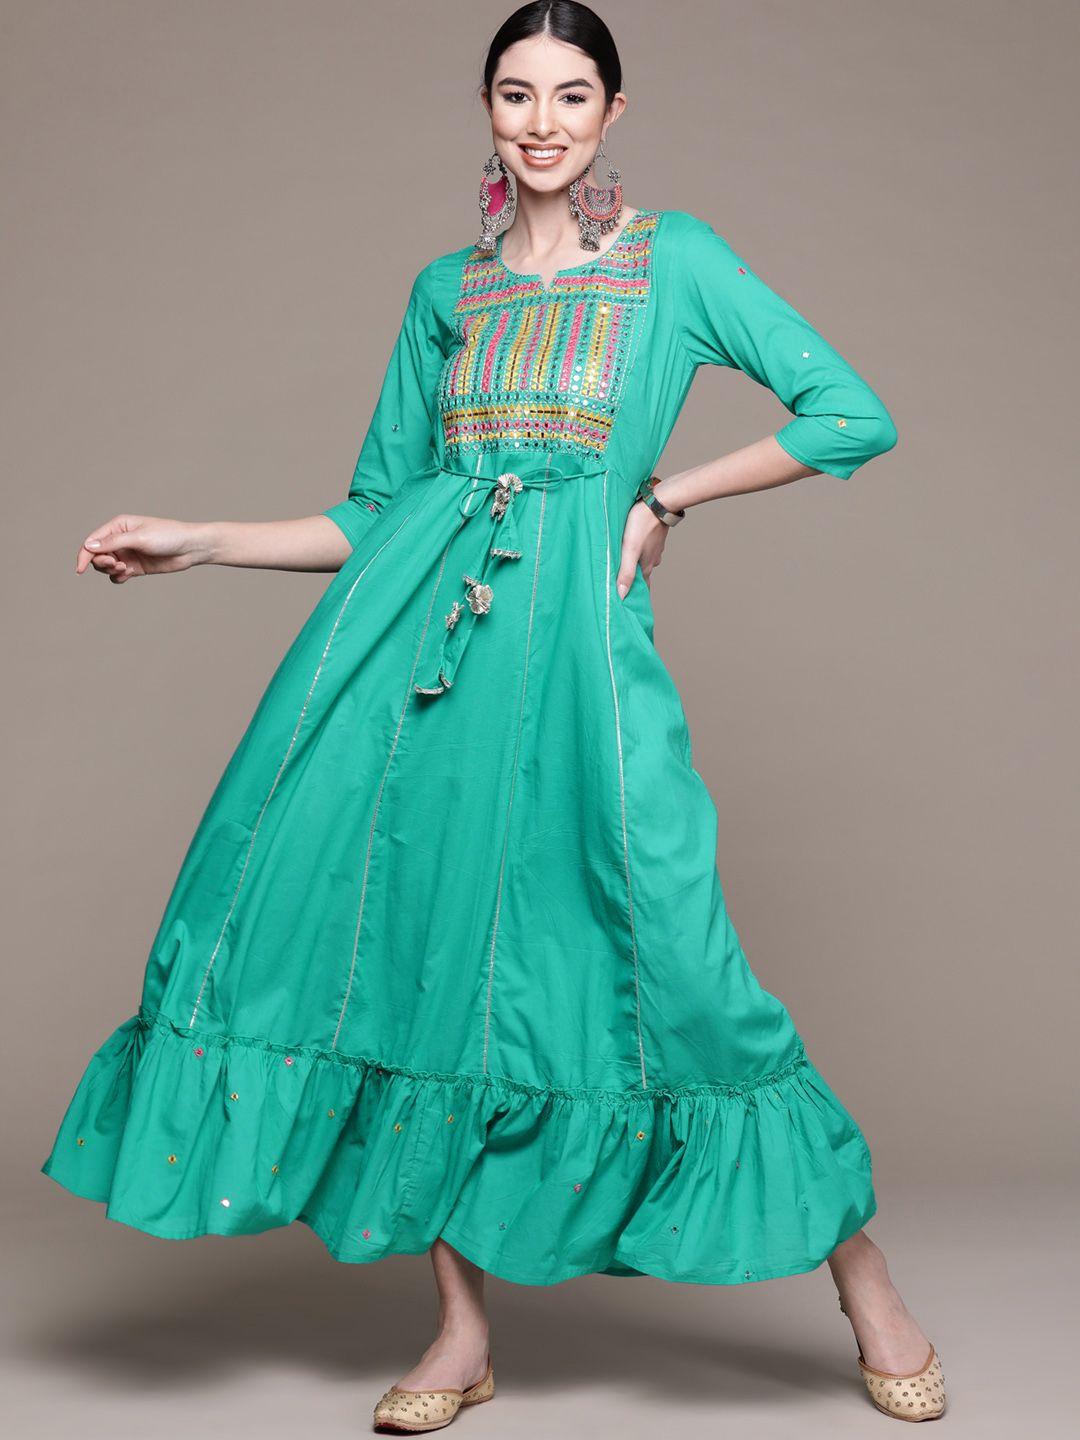 anubhutee green embroidered ethnic cotton ????a-line maxi dress